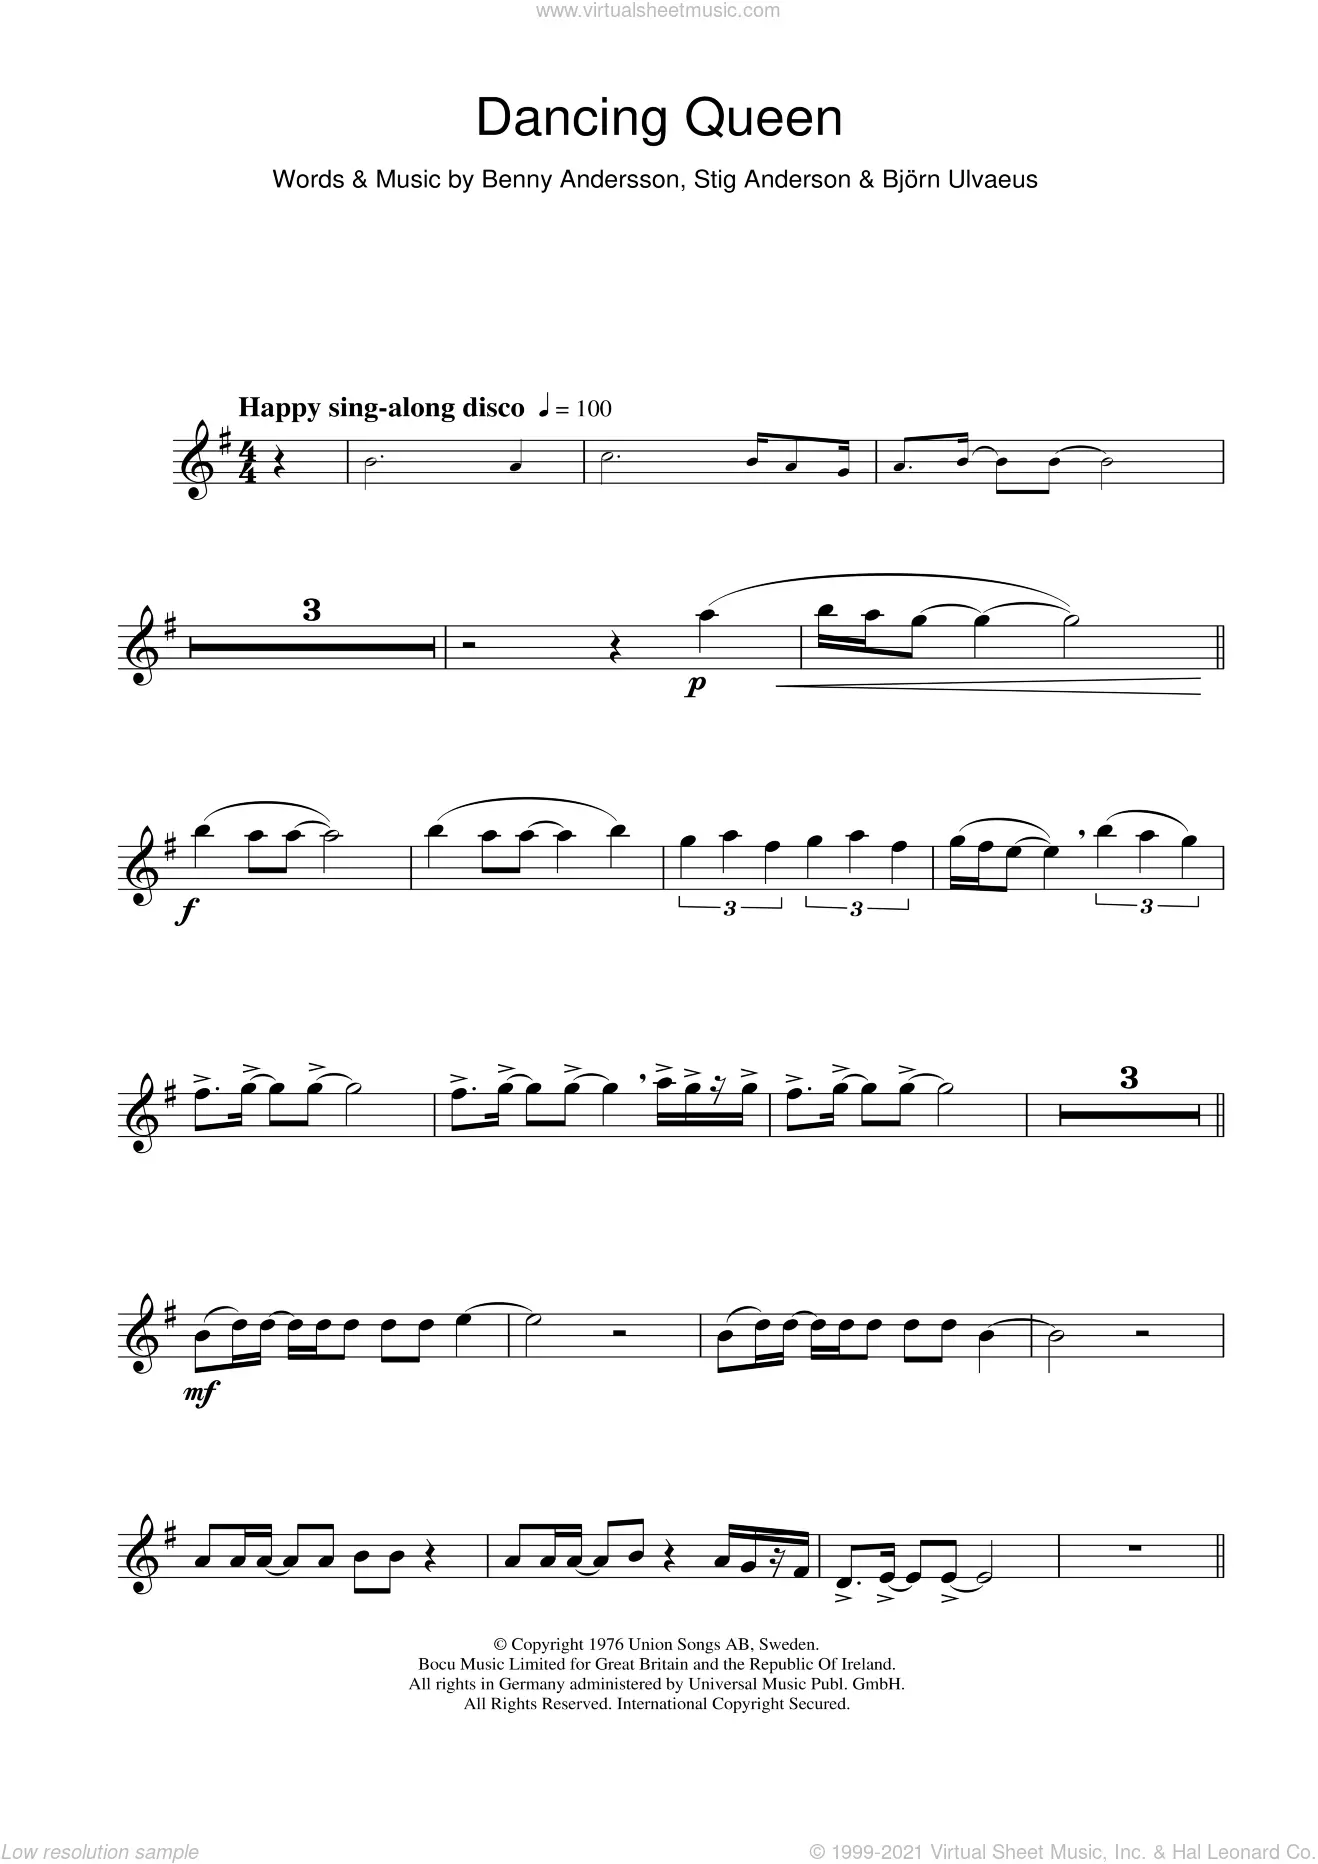 ABBA The Name Of The Game Sheet Music Notes